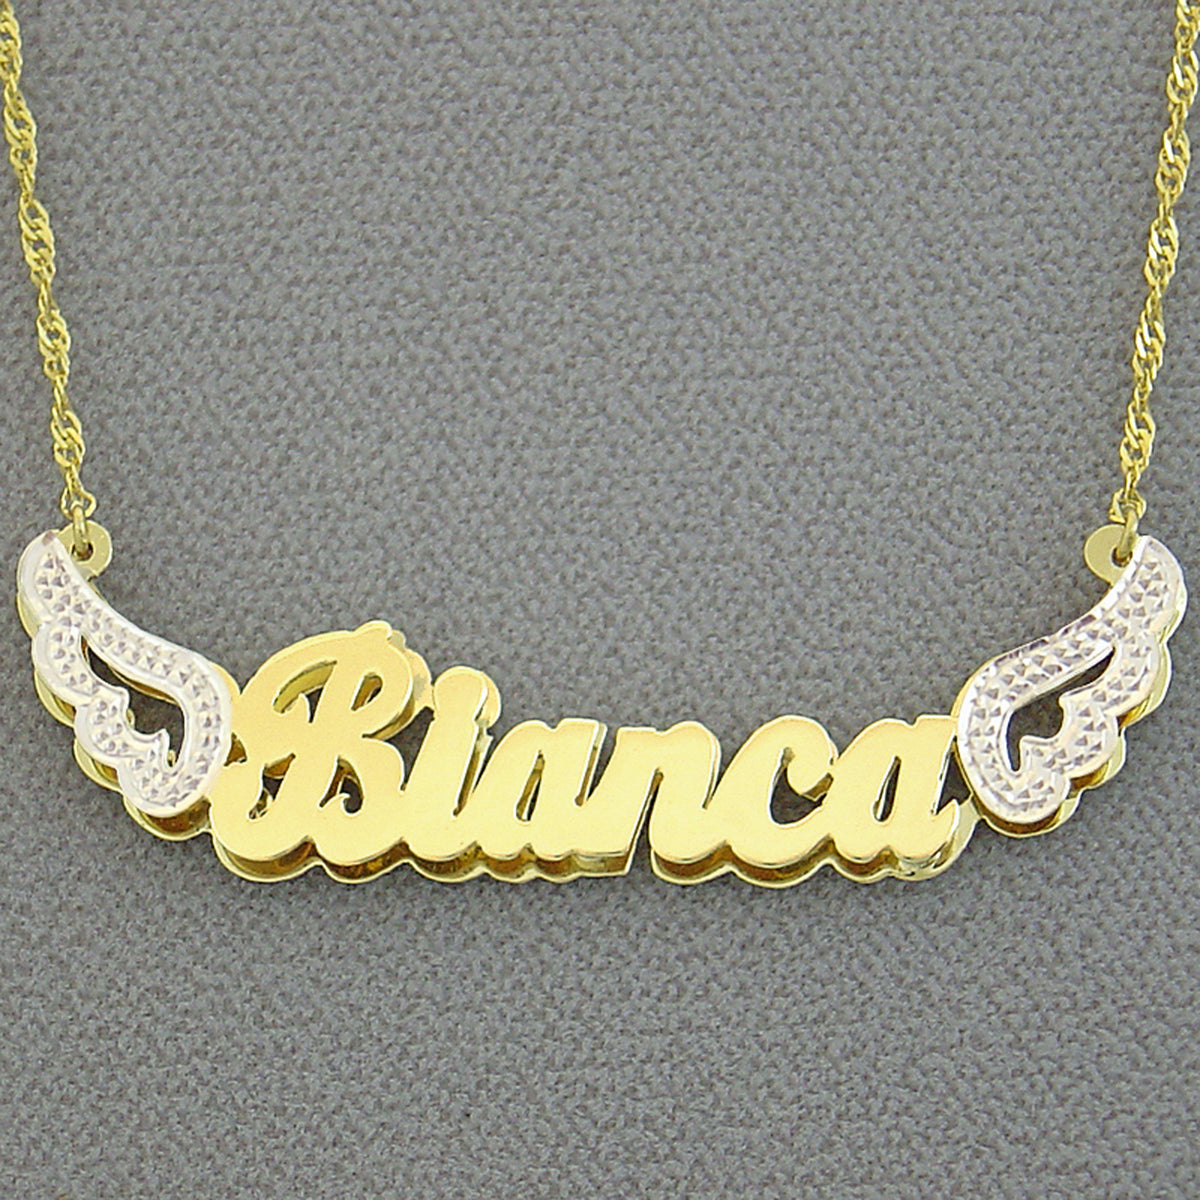 Solid Gold Double Plate Angel Wings Personalized Name 3D Charm Pendant Jewelry ND40